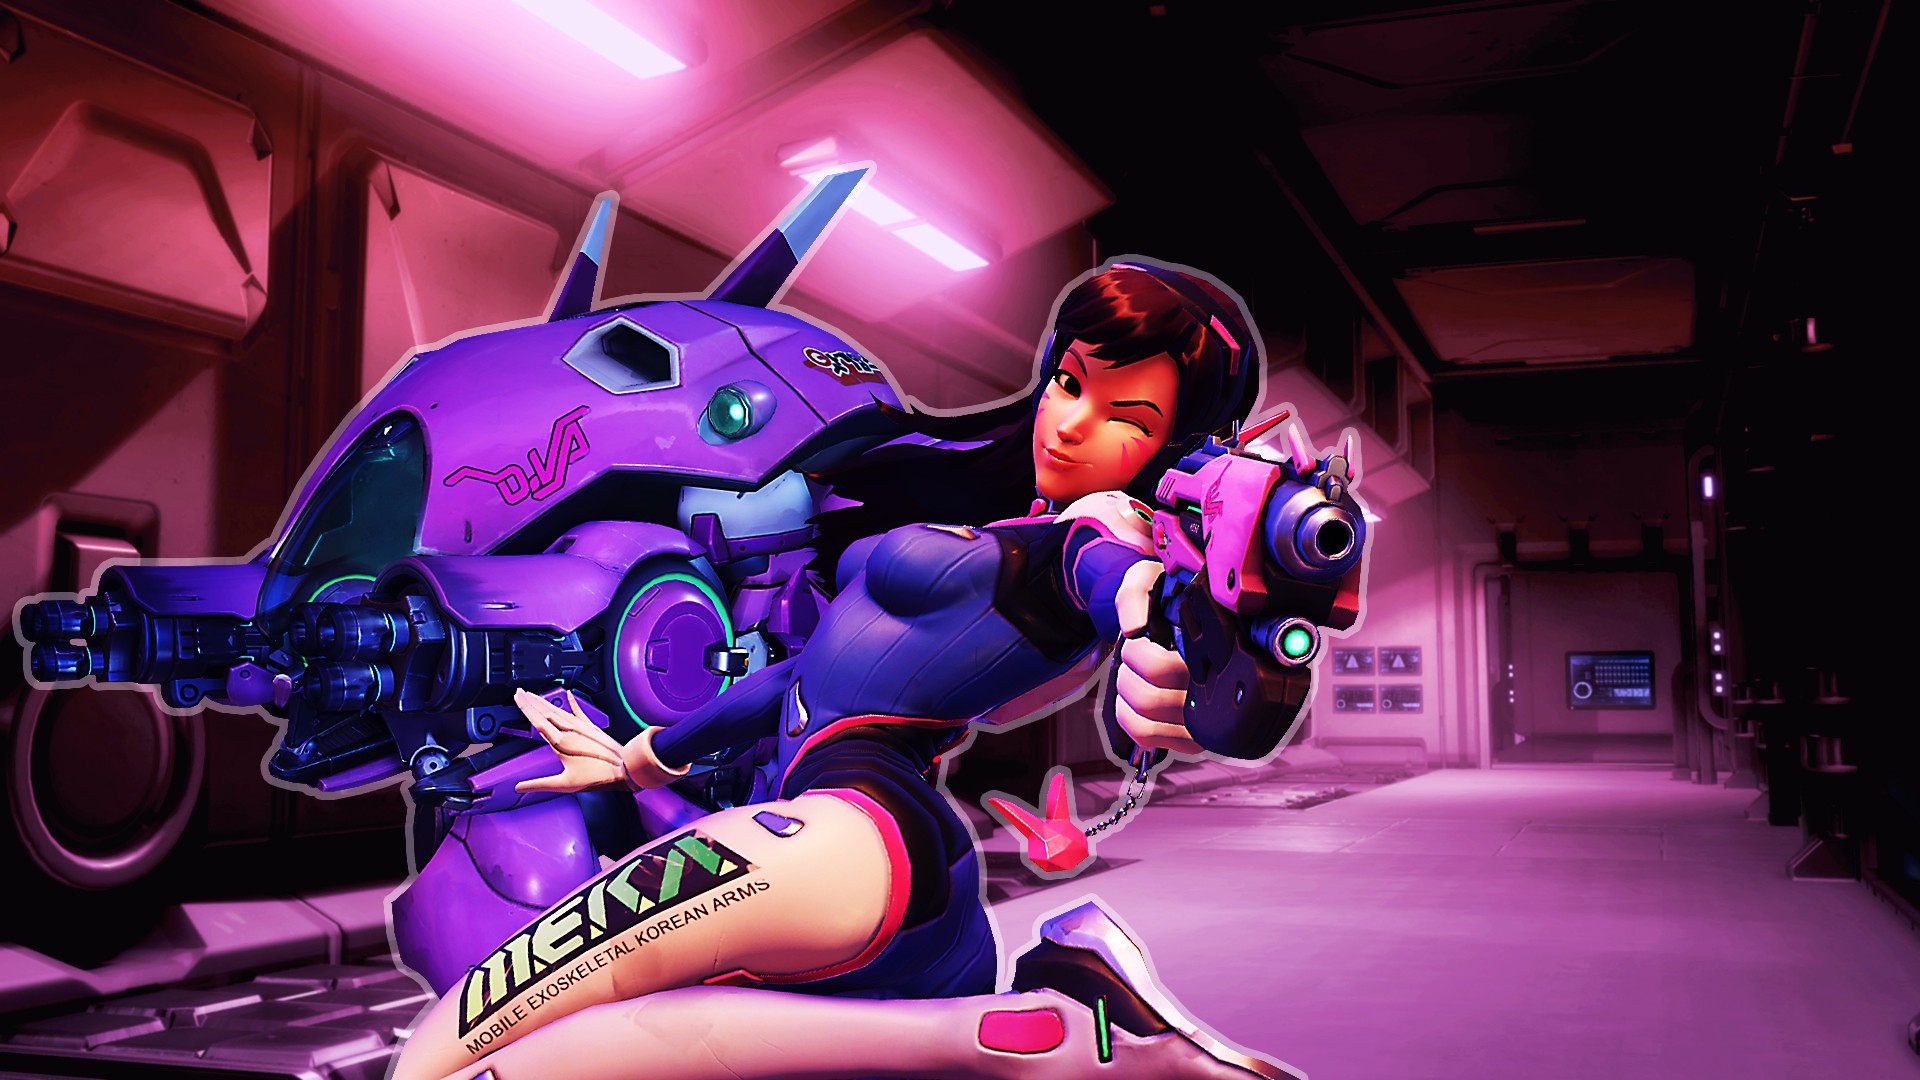 General 1920x1080 Blizzard Entertainment Overwatch video games livewirehd (Author) D.Va (Overwatch) girls with guns video game girls PC gaming aiming one eye closed thighs